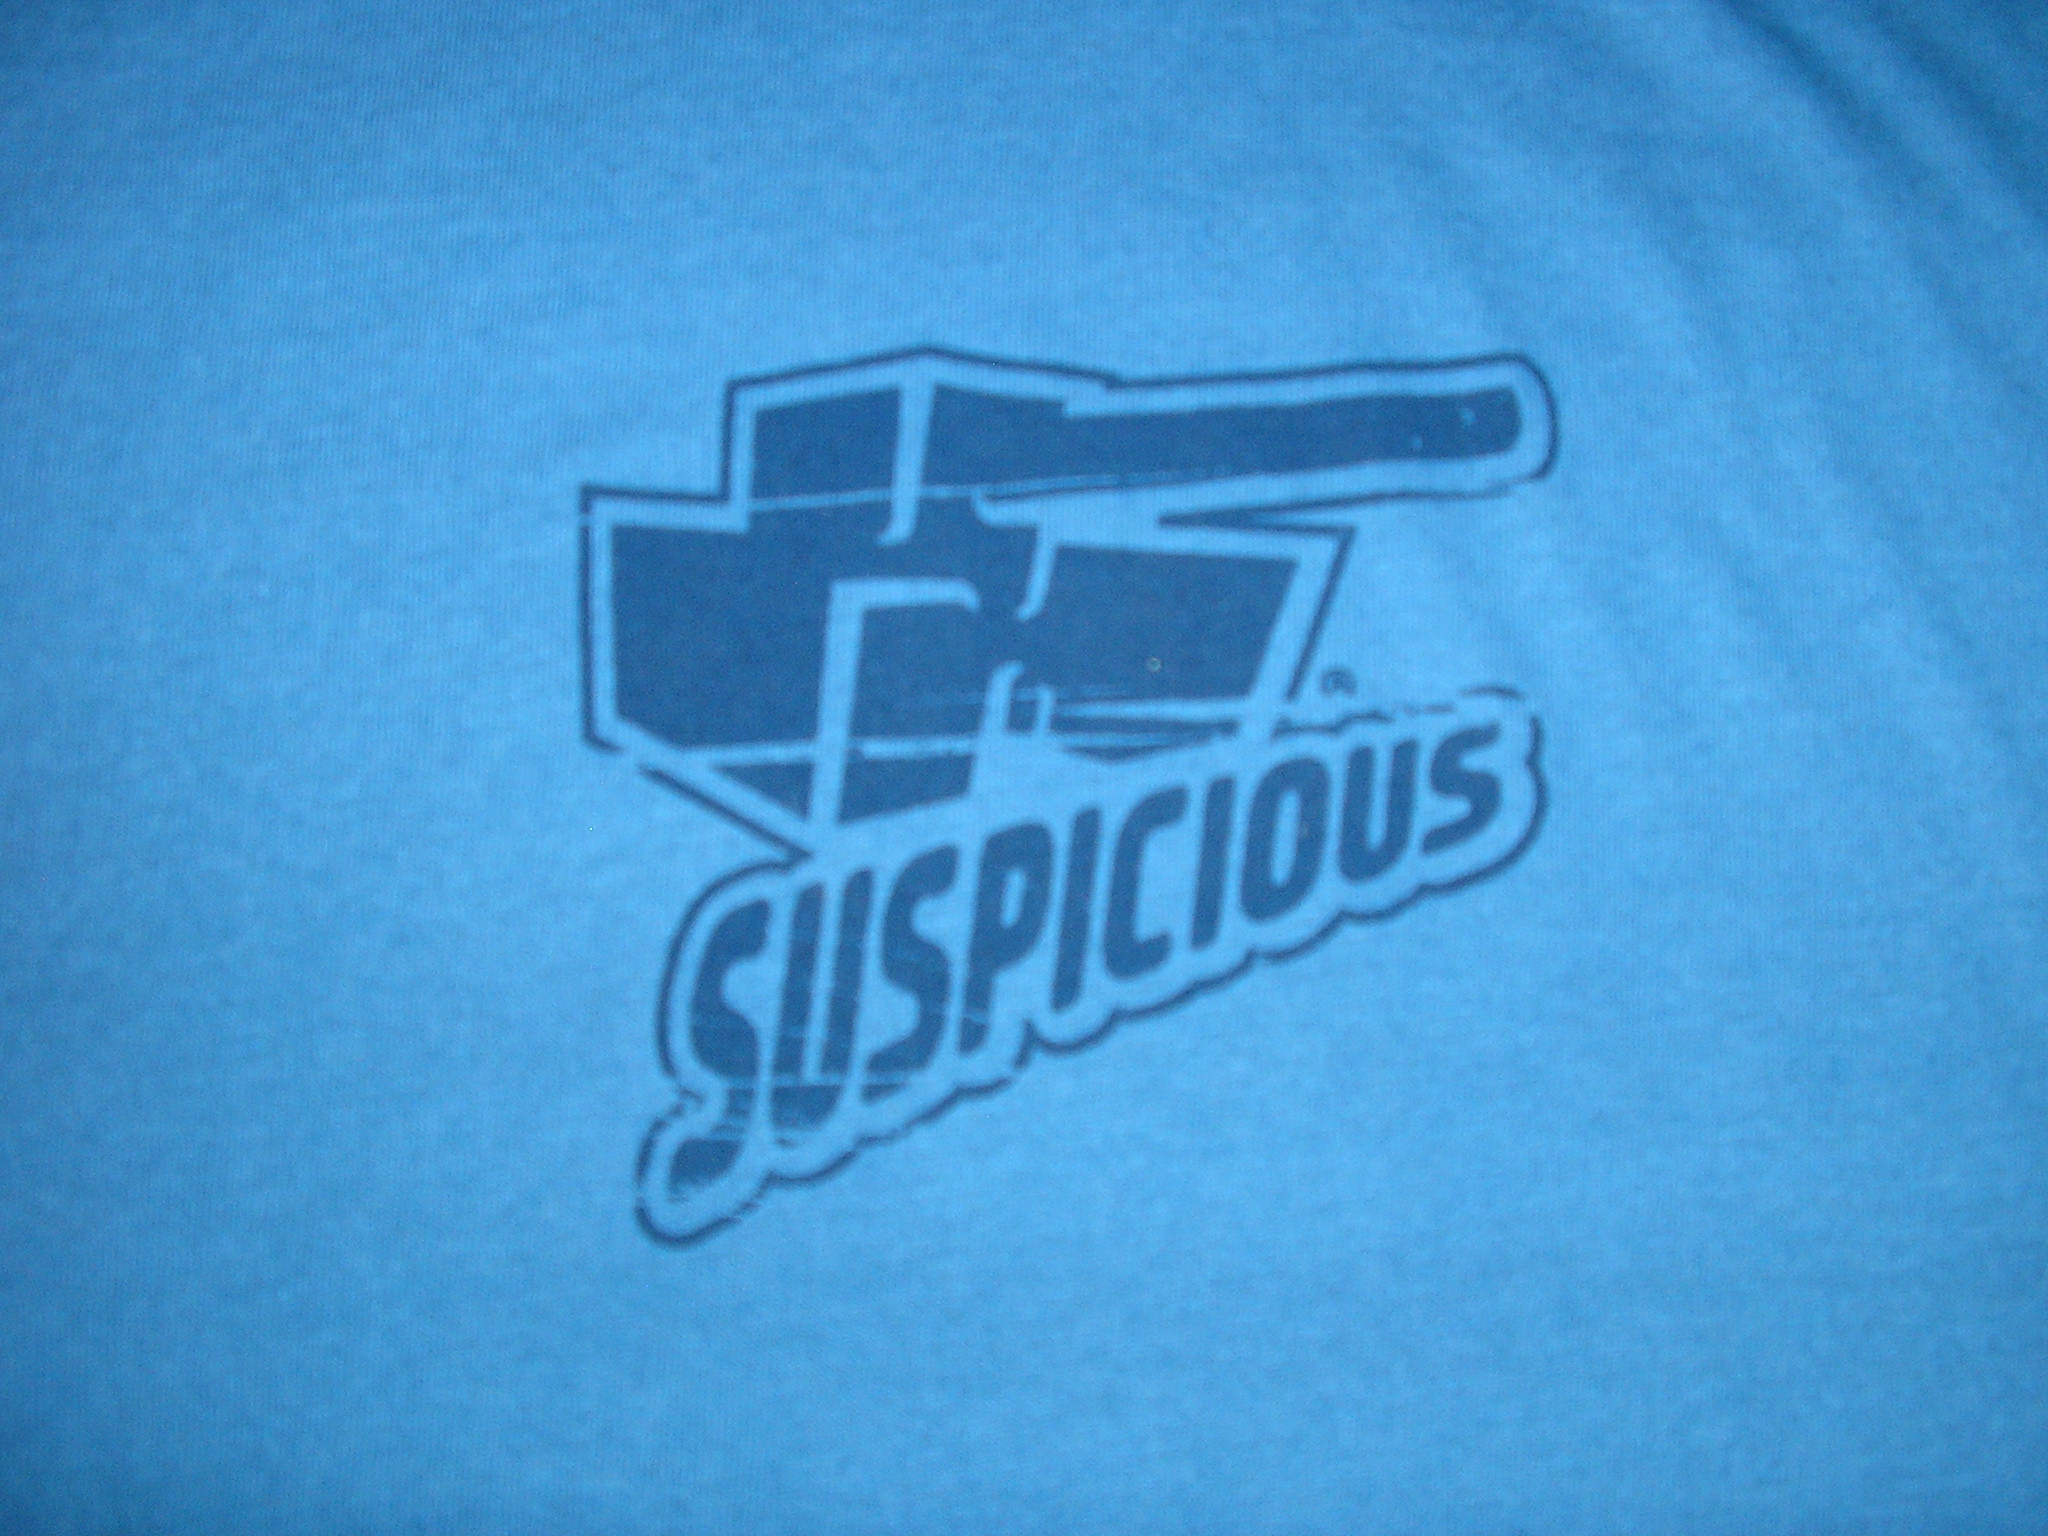 Suspicious Clothing Summer 2011 Pre-Launch 30% off — Hide Your Arms